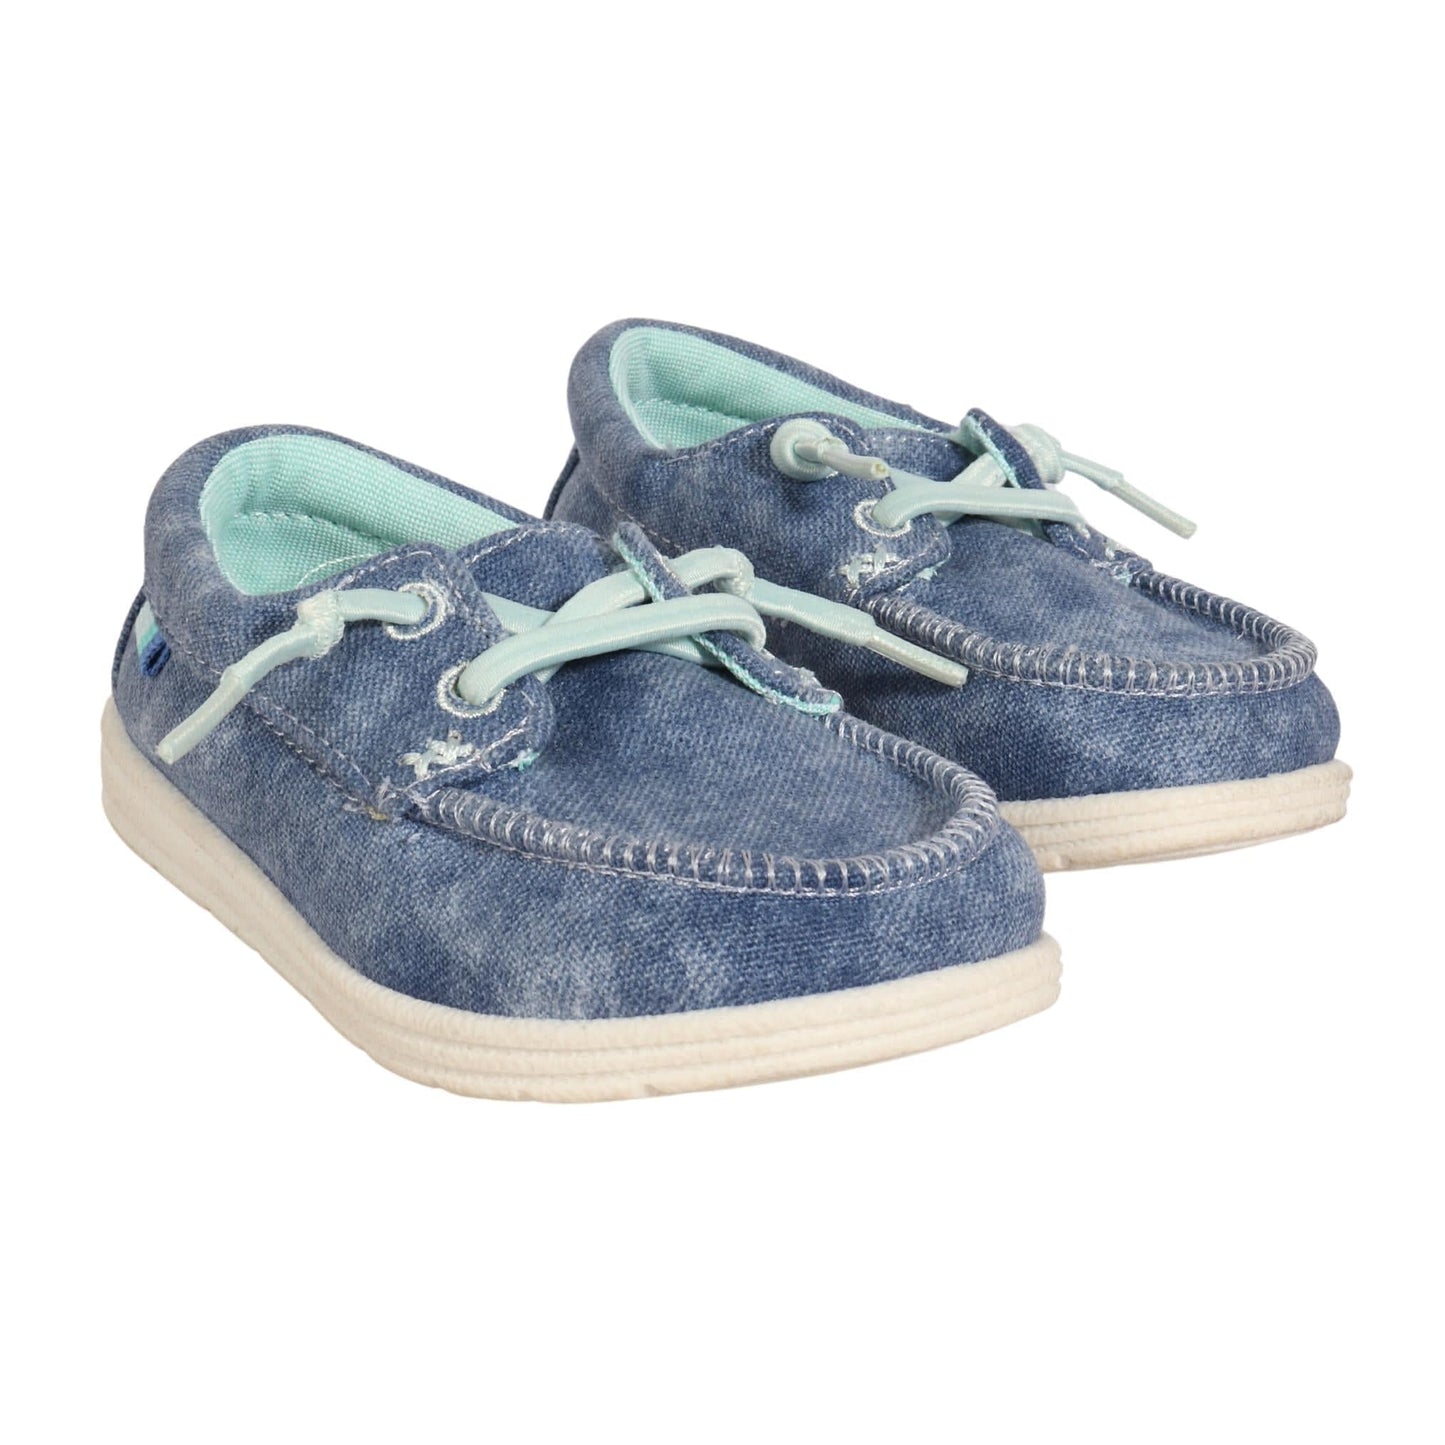 CAT & JACK Baby Shoes 22 / Blue CAT & JACK - Baby - Bobby Slip-On Sneakers